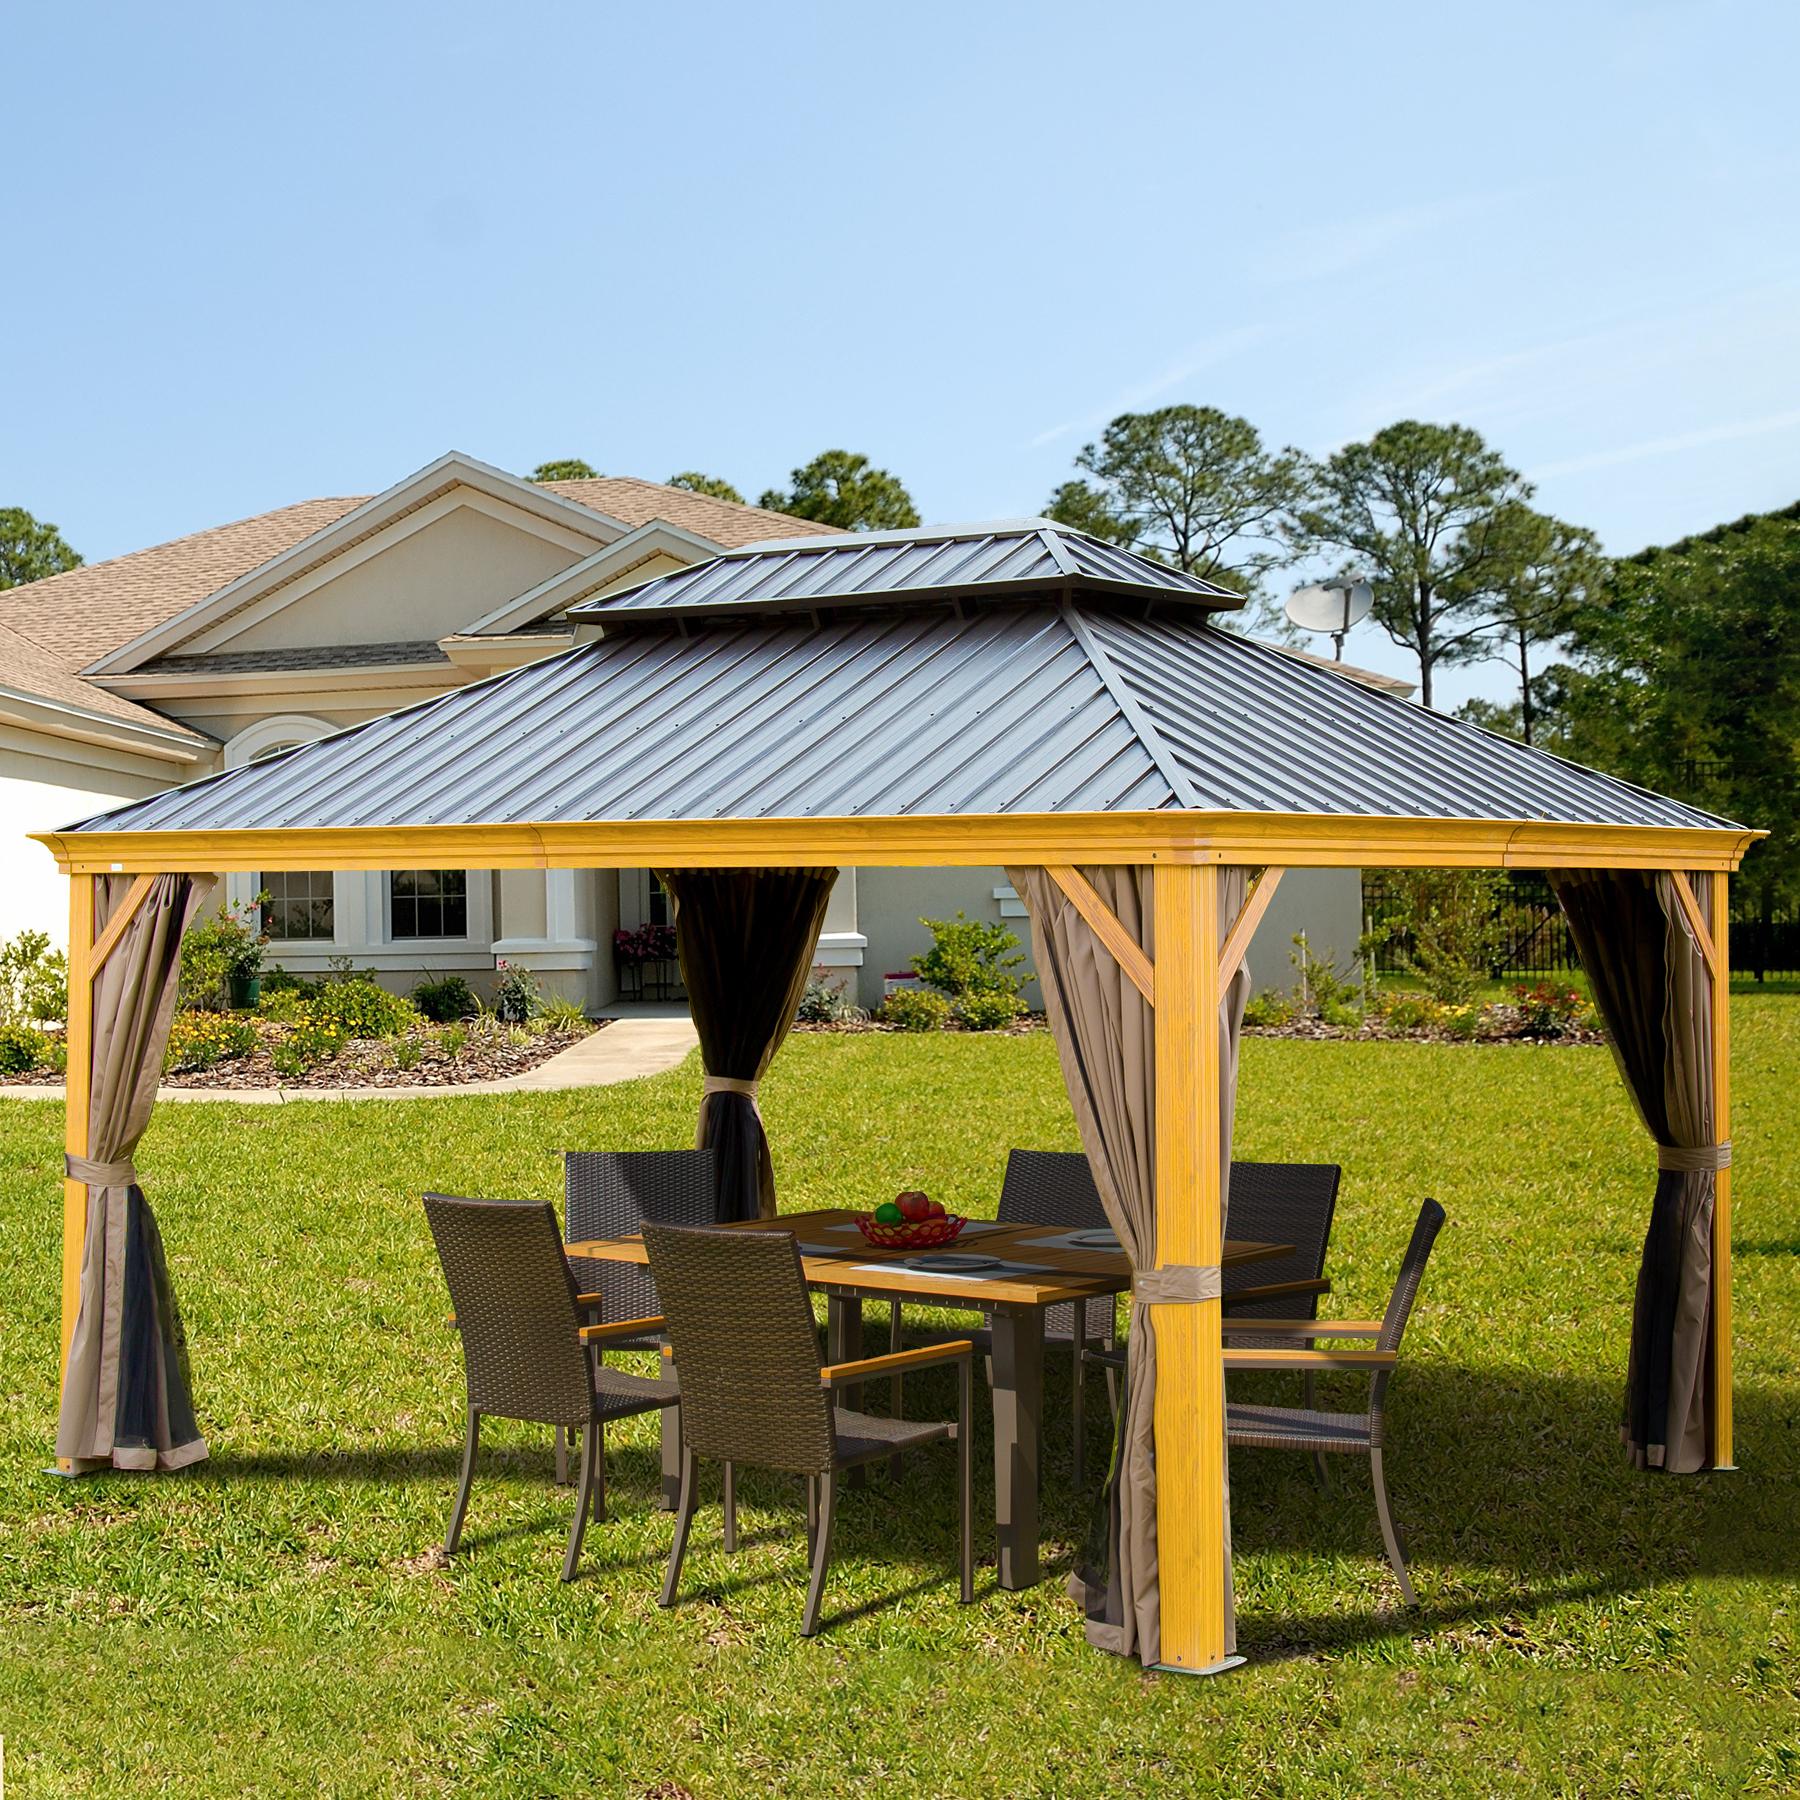 Domi Hardtop Gazebo Outdoor Aluminum Roof Canopy With Mosquito Netting and Curtains